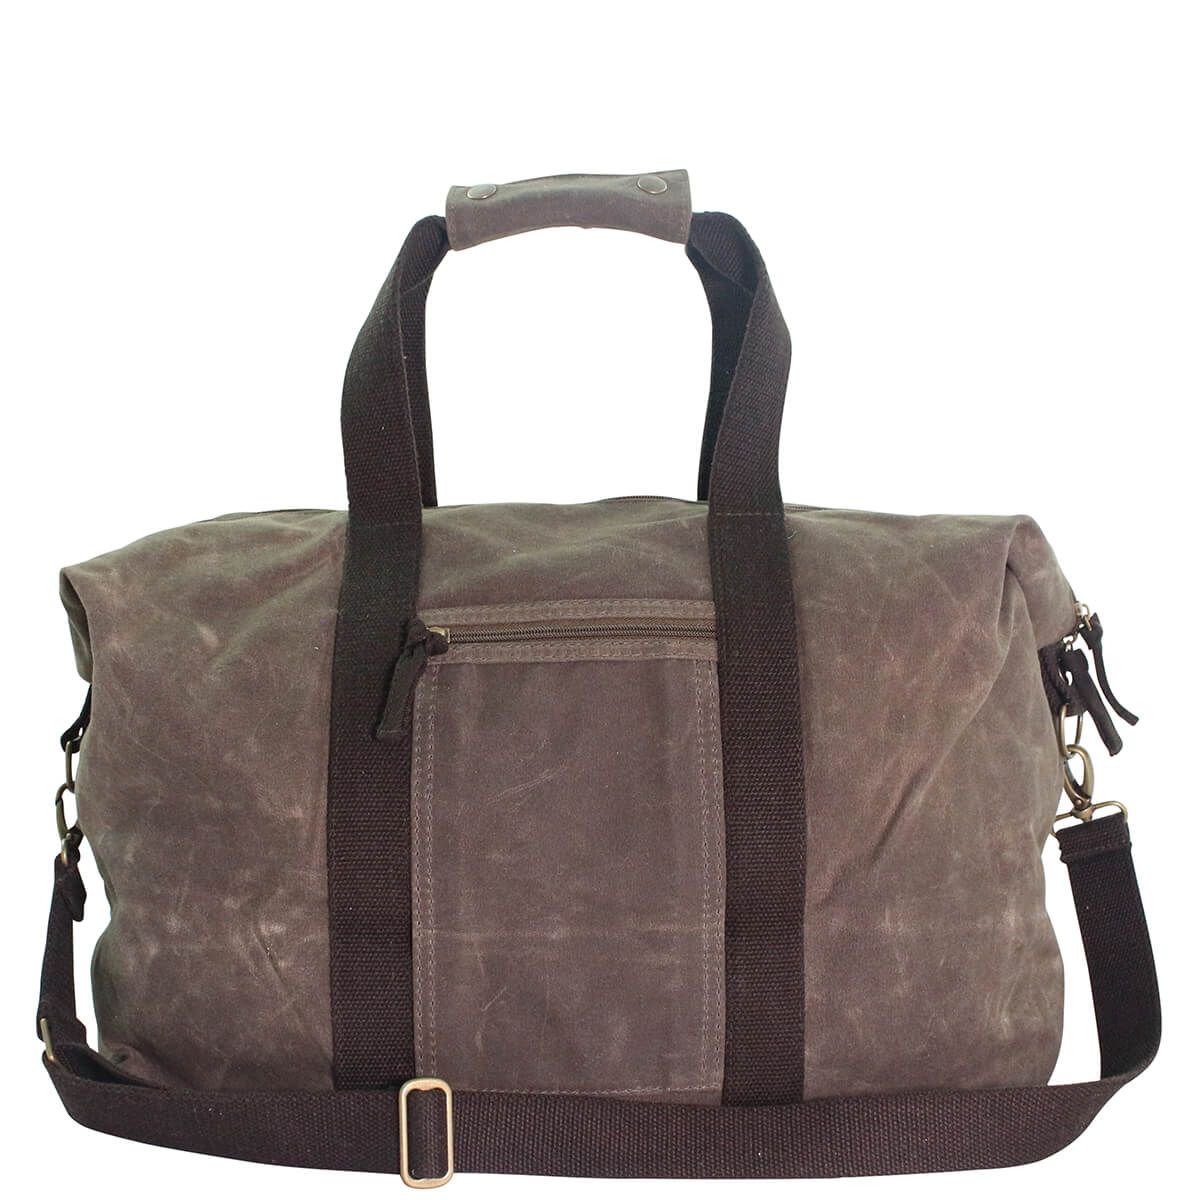 Monogrammed Waxed Canvas Expedition Overnight Bag- 5 Star!